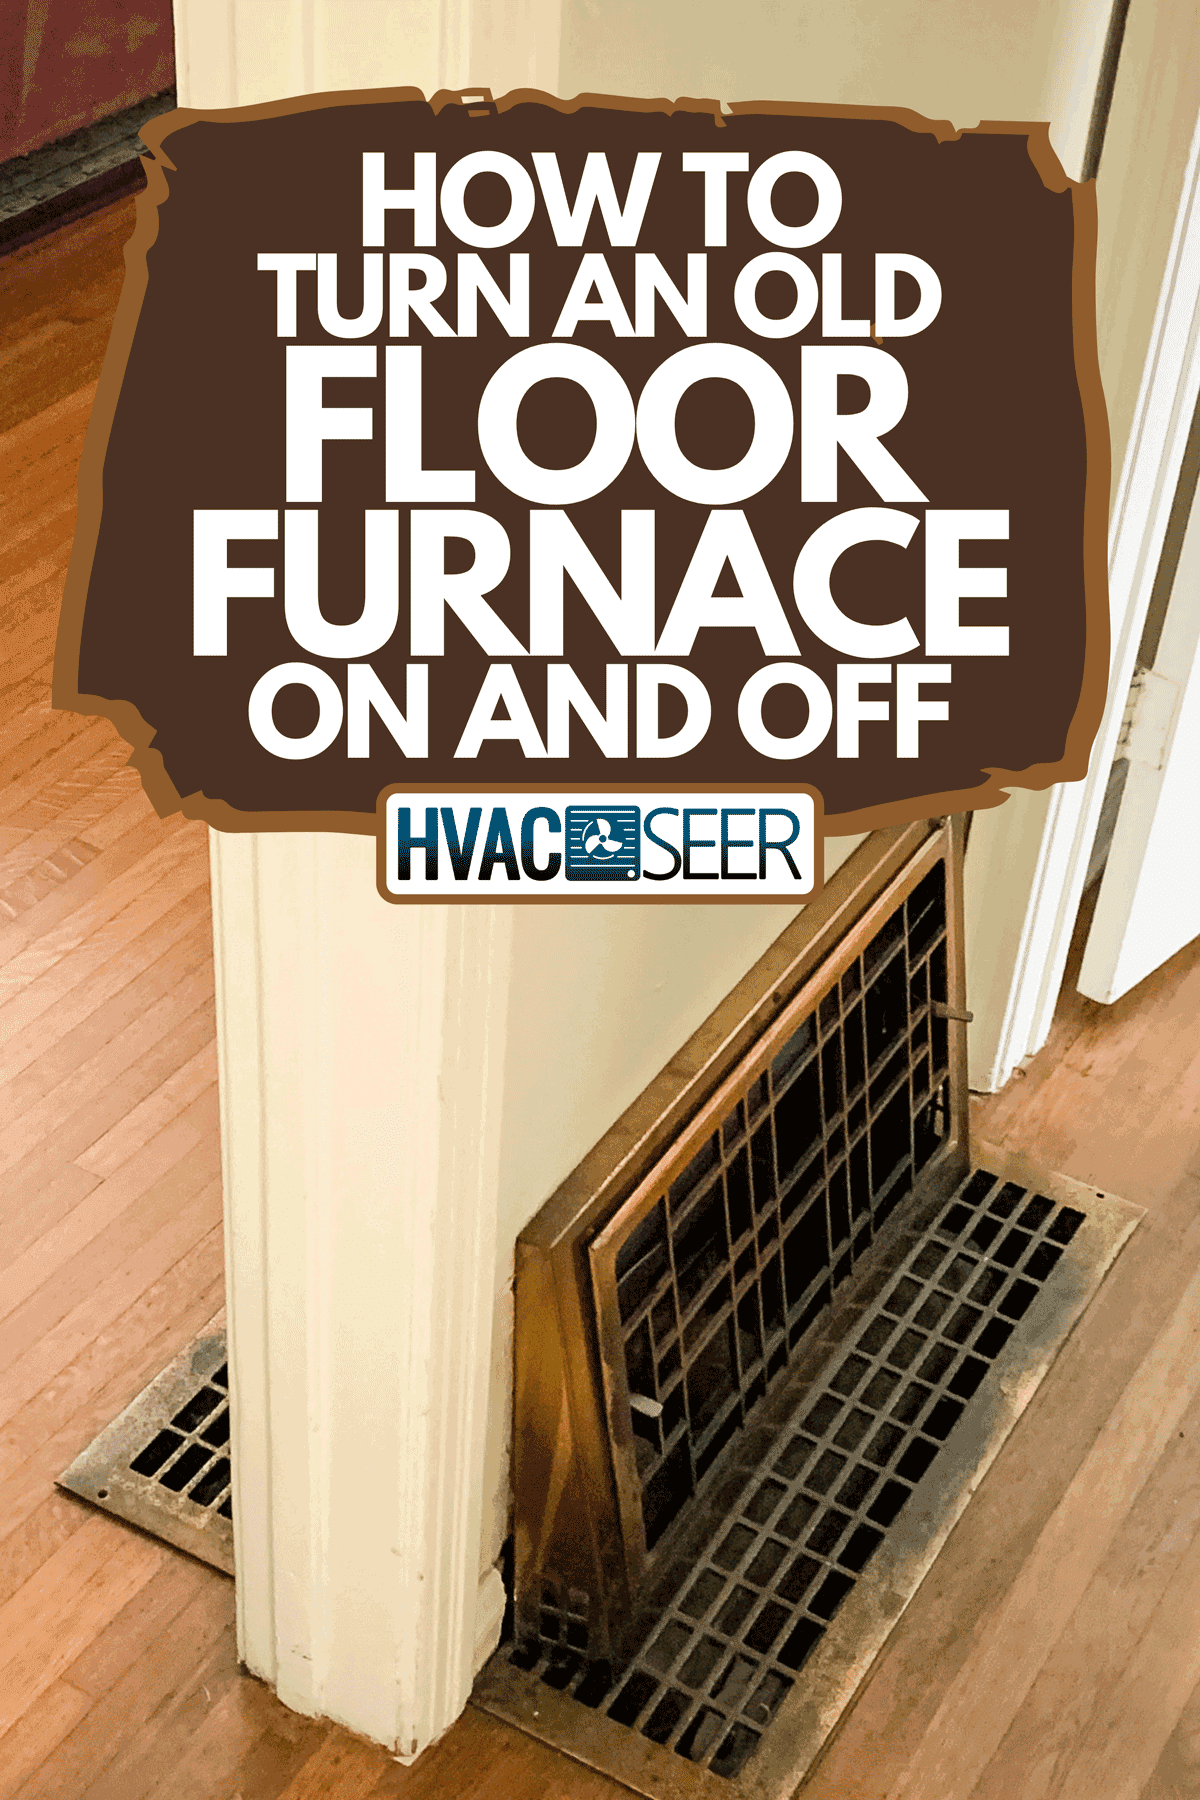 An old floor furnace of a home, How To Turn An Old Floor Furnace On And Off